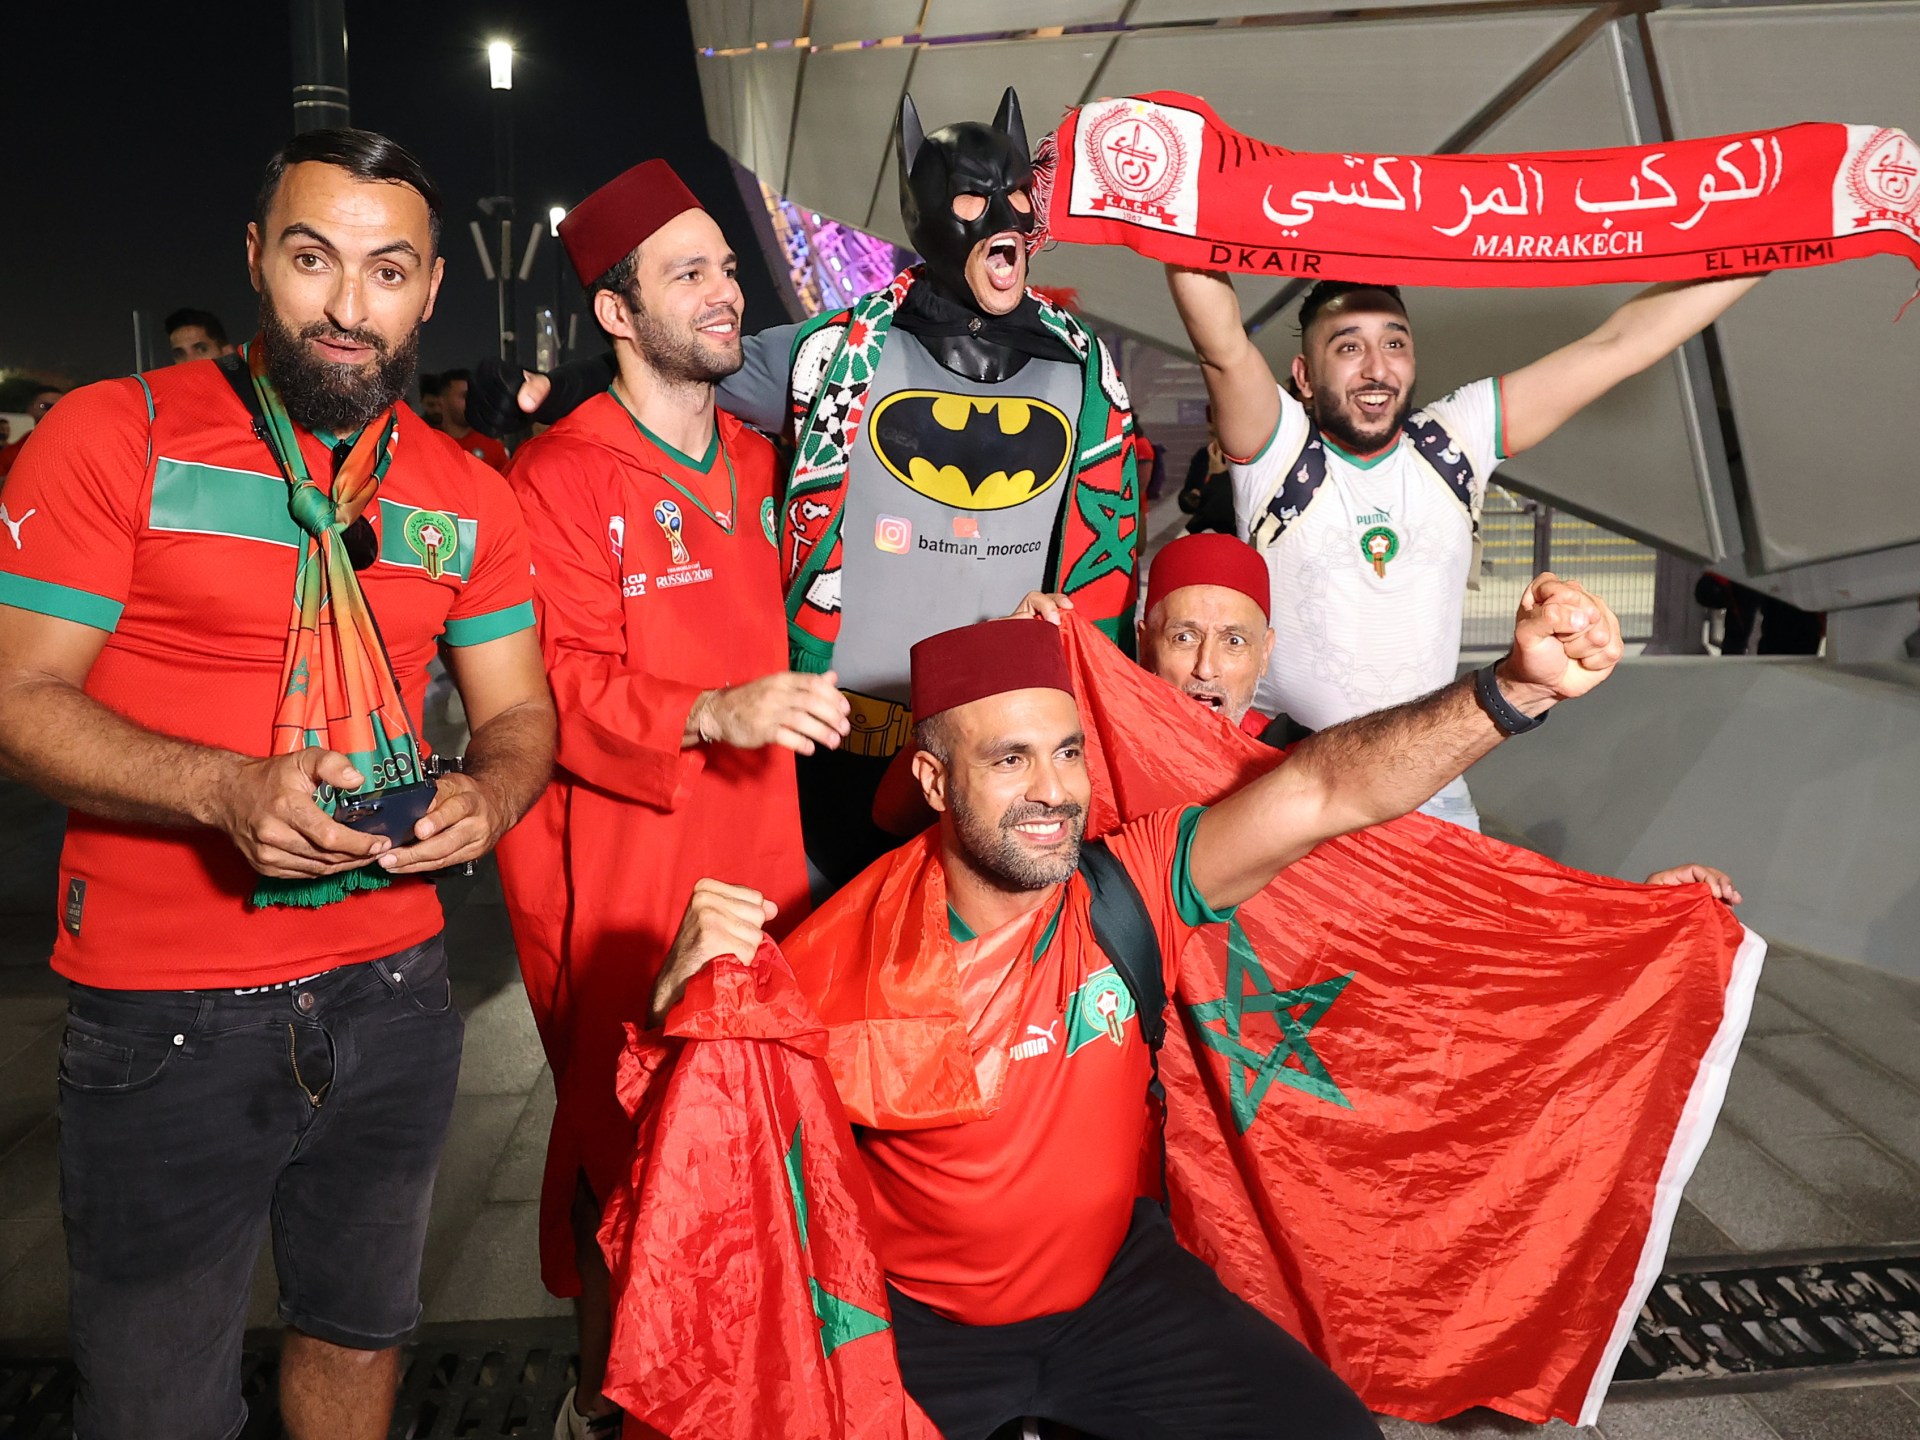 Arabs rejoice as one over Morocco’s historic win